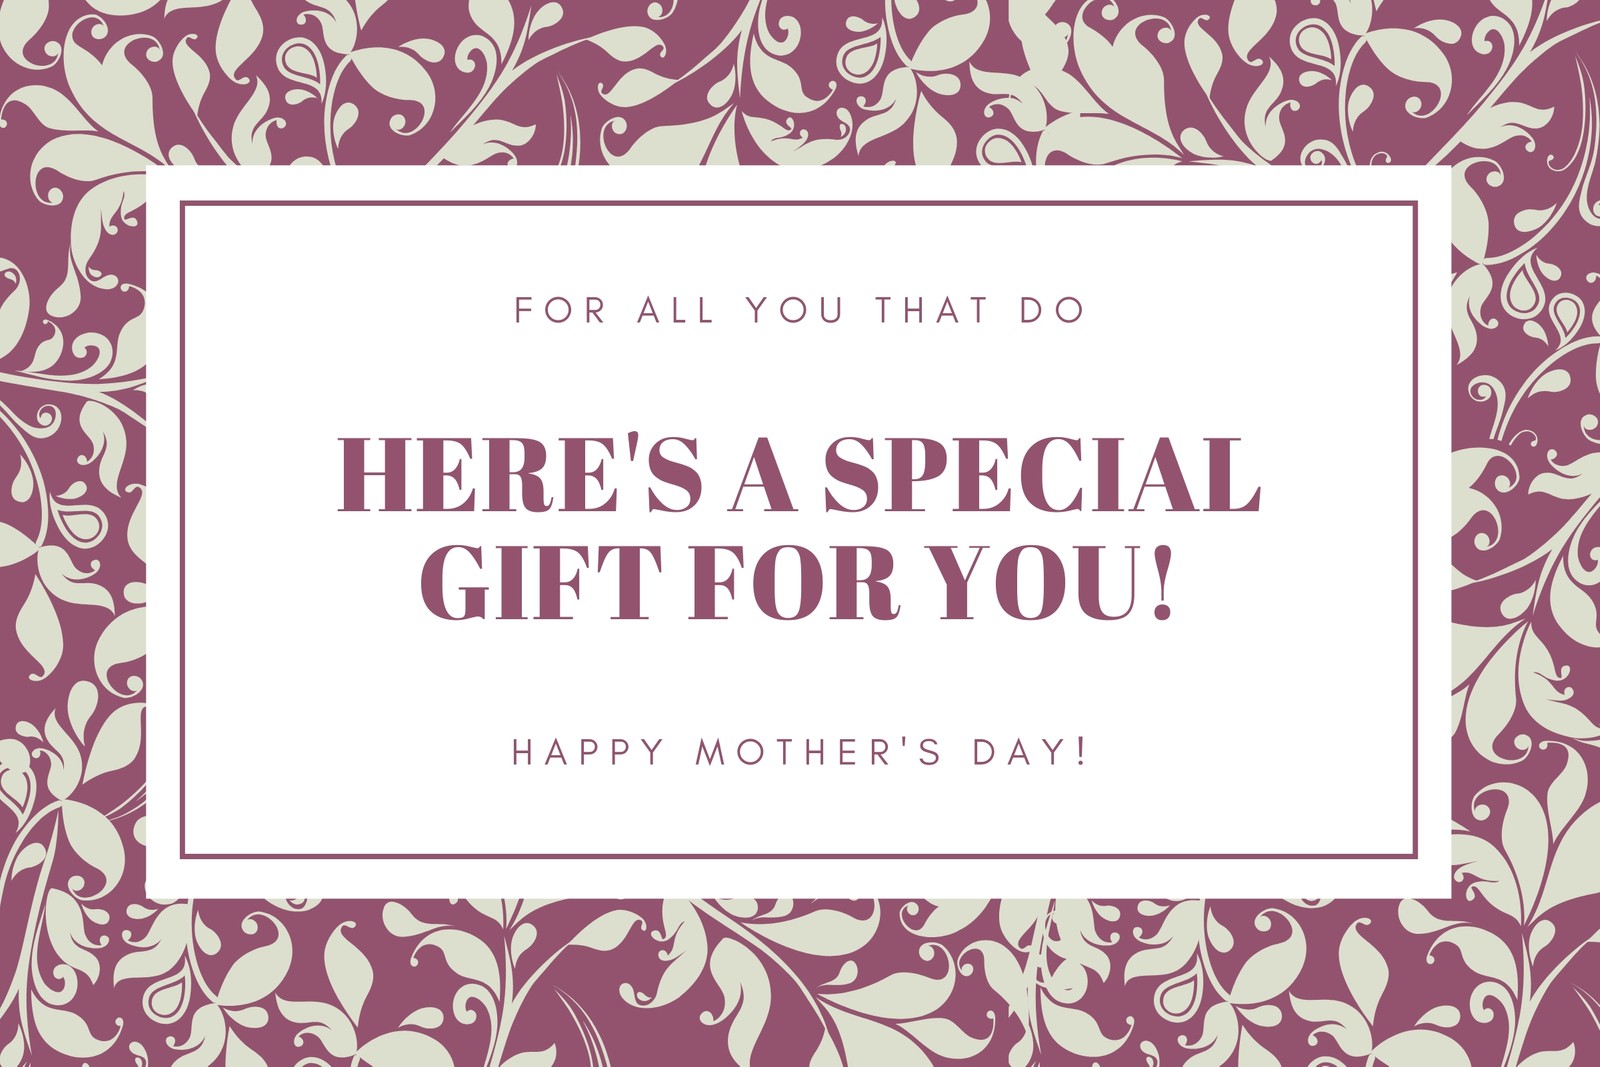 customize-94-mother-s-day-gift-certificates-templates-online-canva